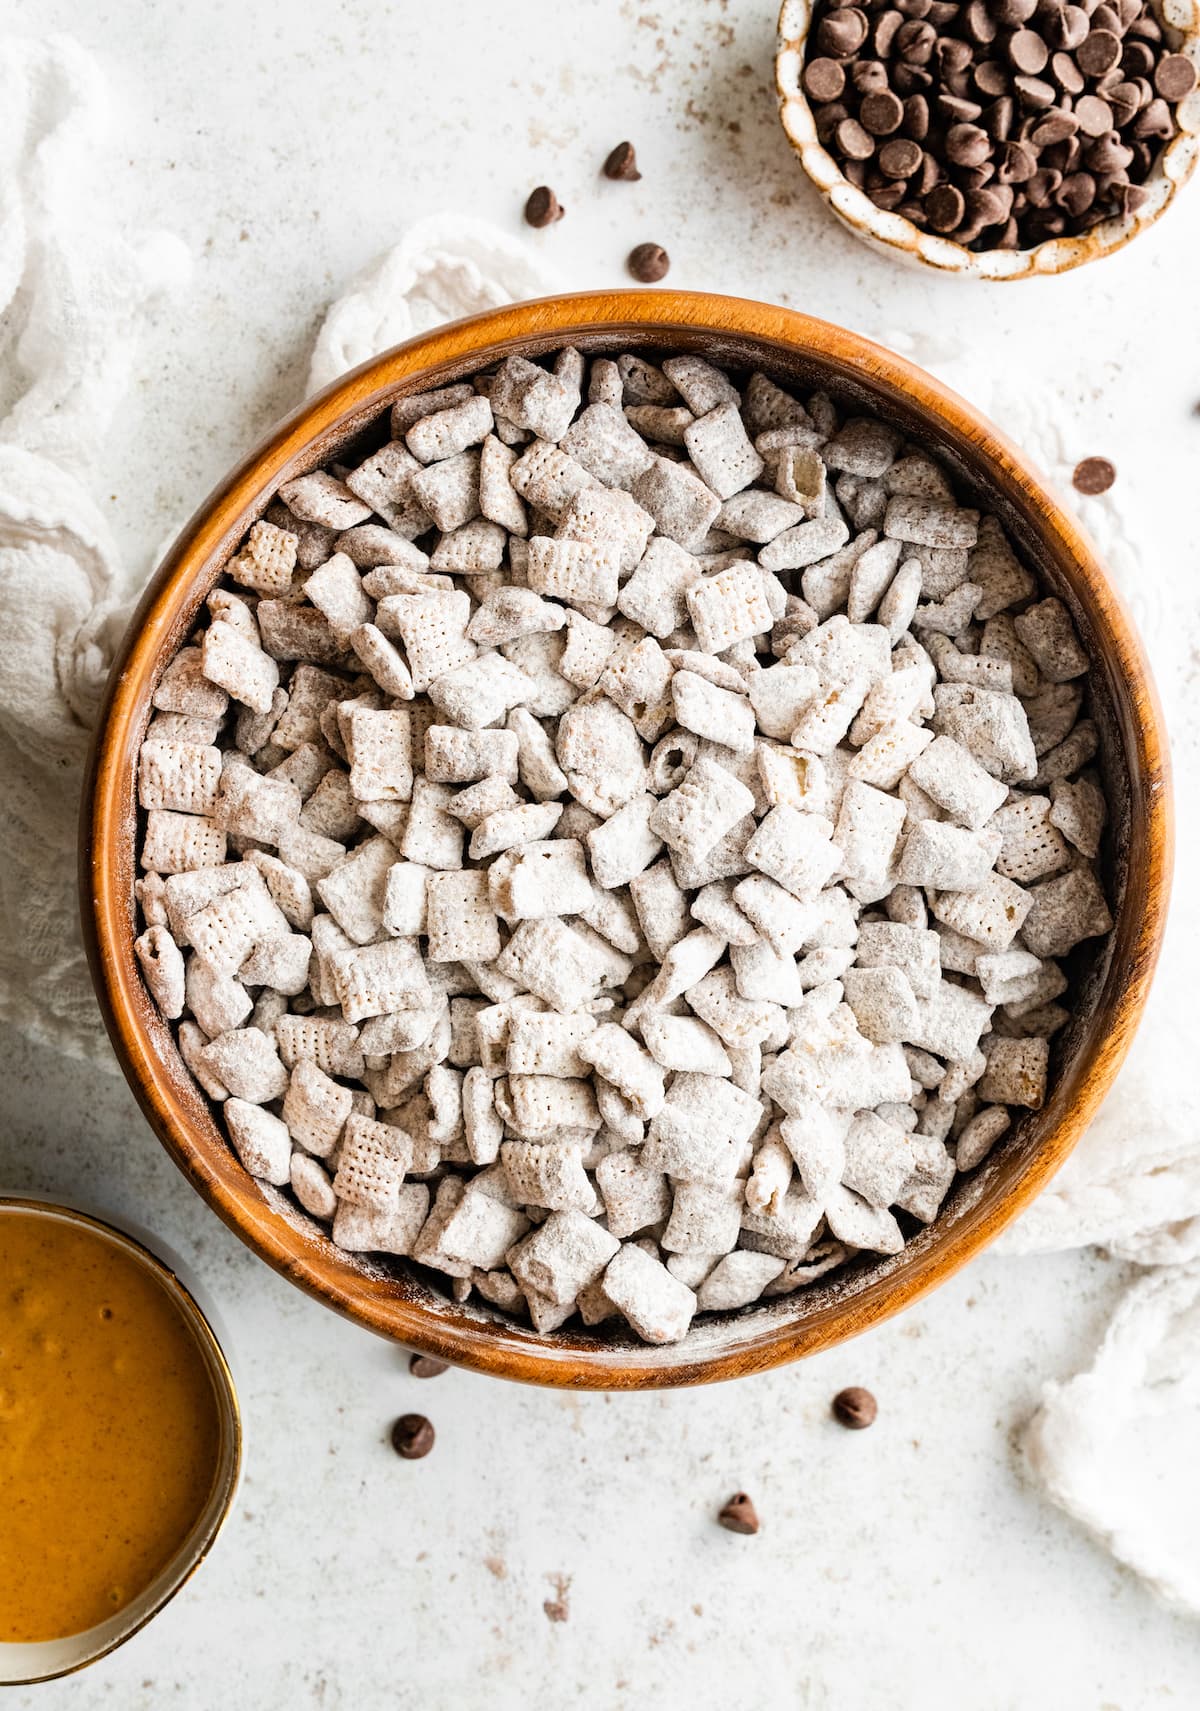 Puppy chow in a large wood bowl.